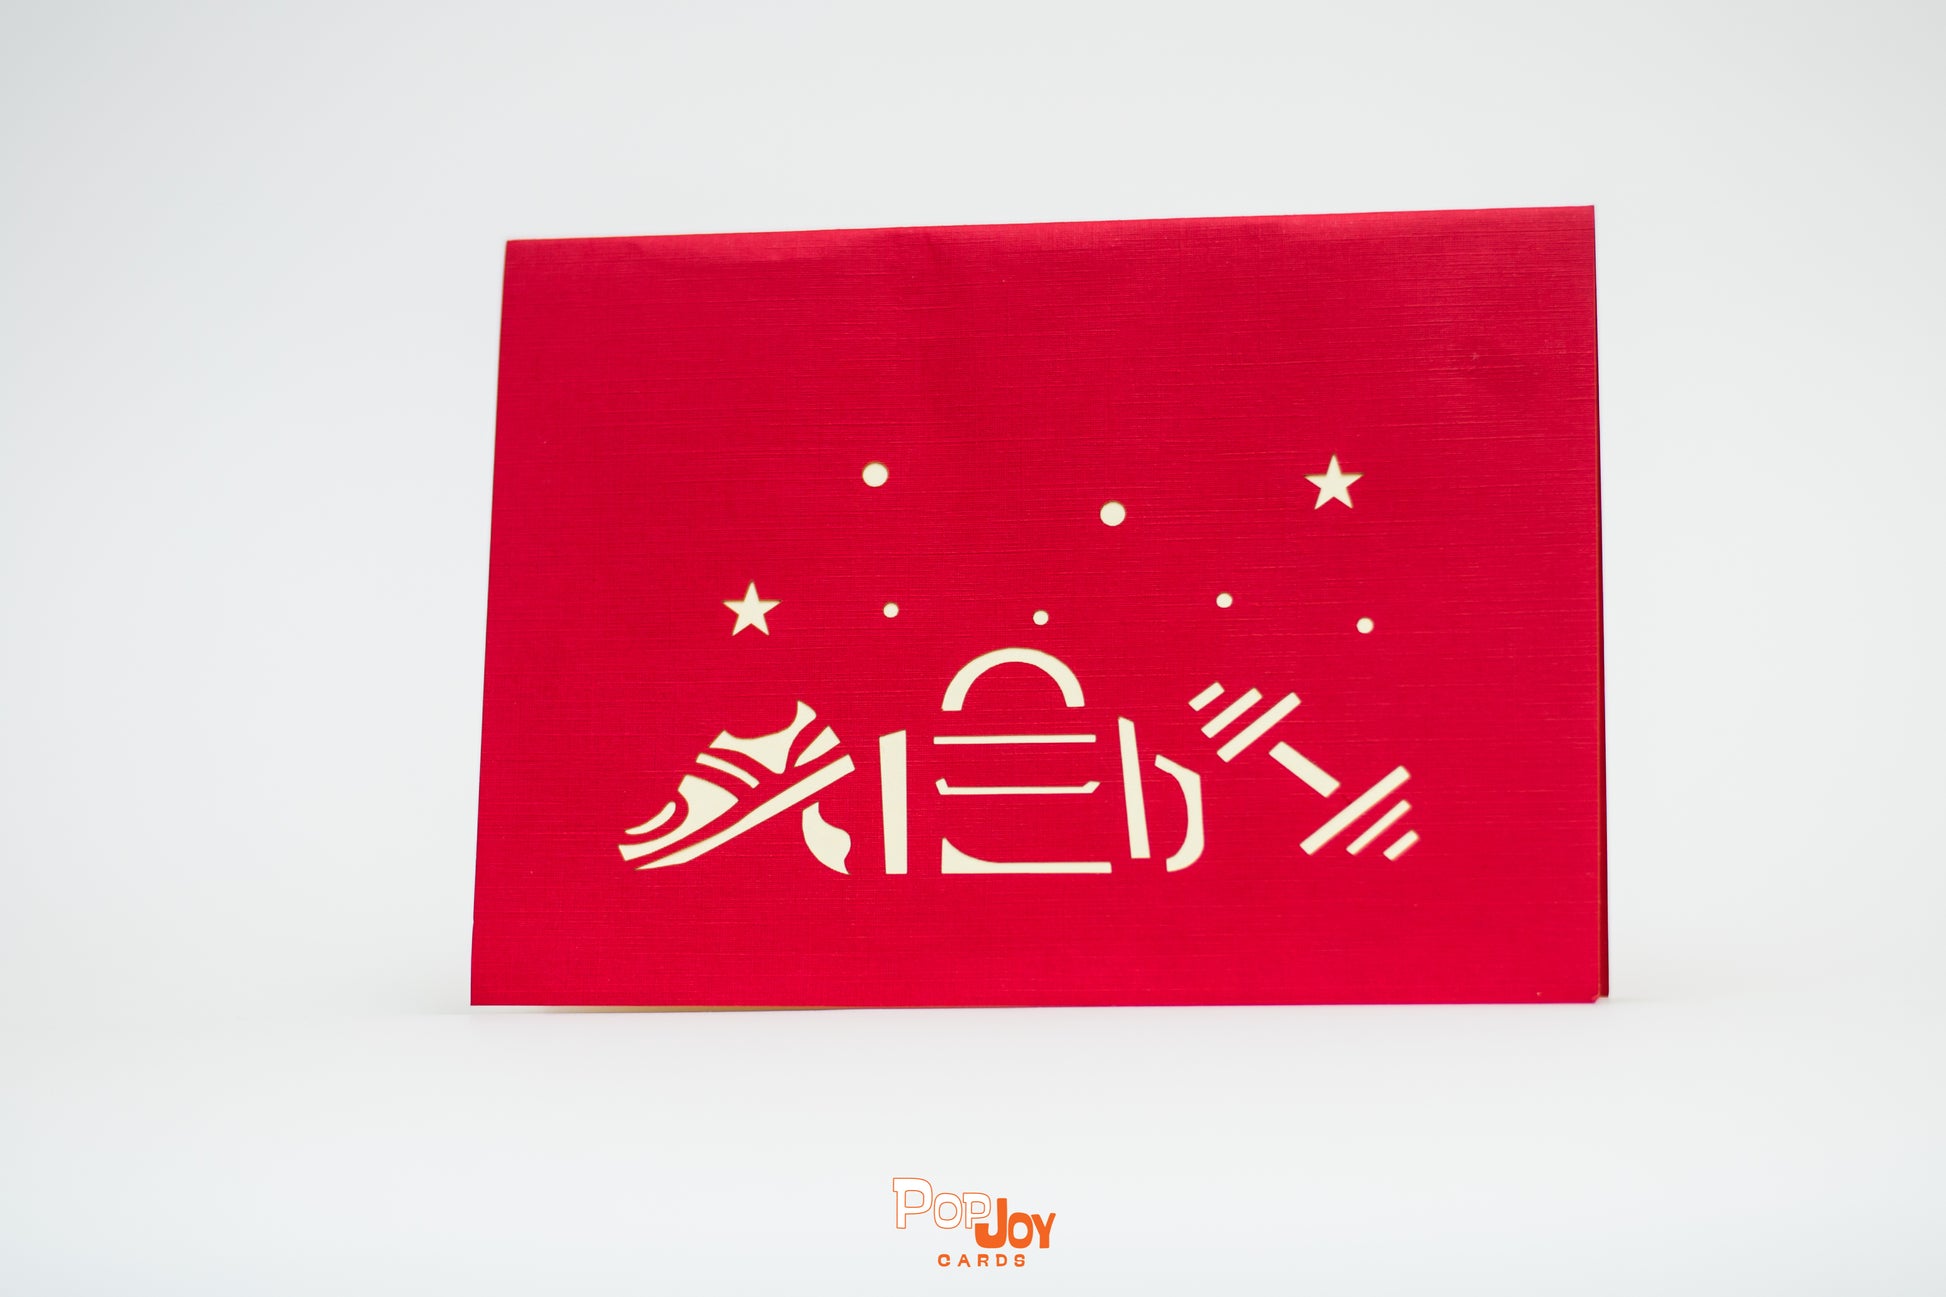 Red card with etching of gym show, gym bag and dumbbell weight in creamy white